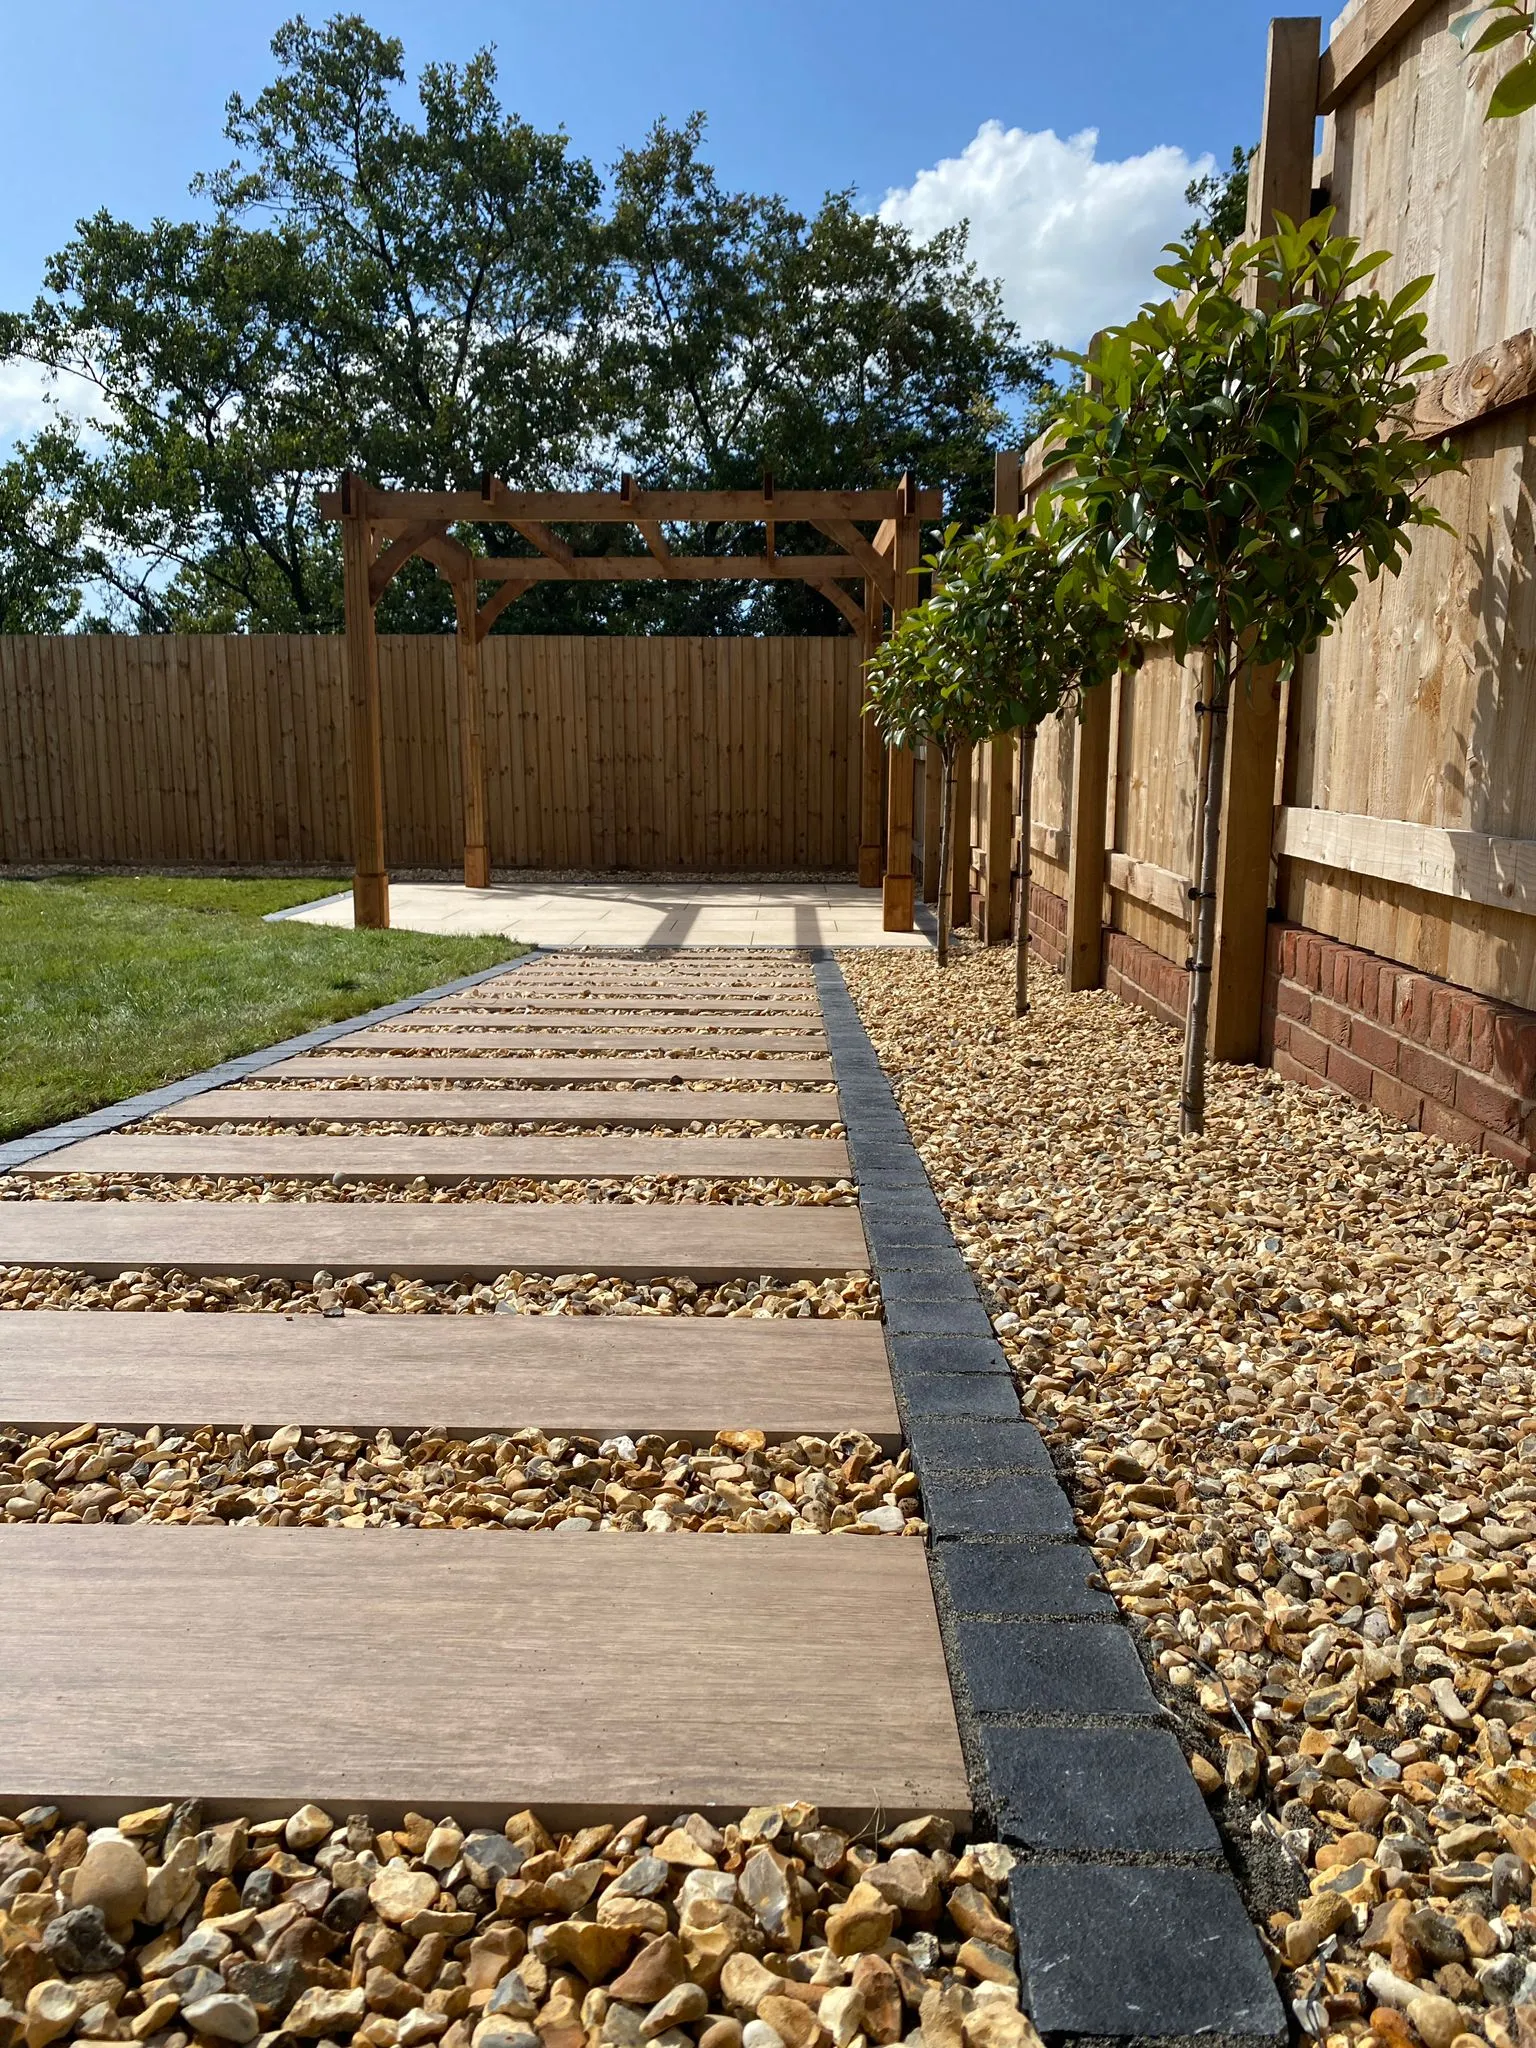 Wood effect porcelain paving with contrasting stone block edging, red robin trees and golden quartz gravel